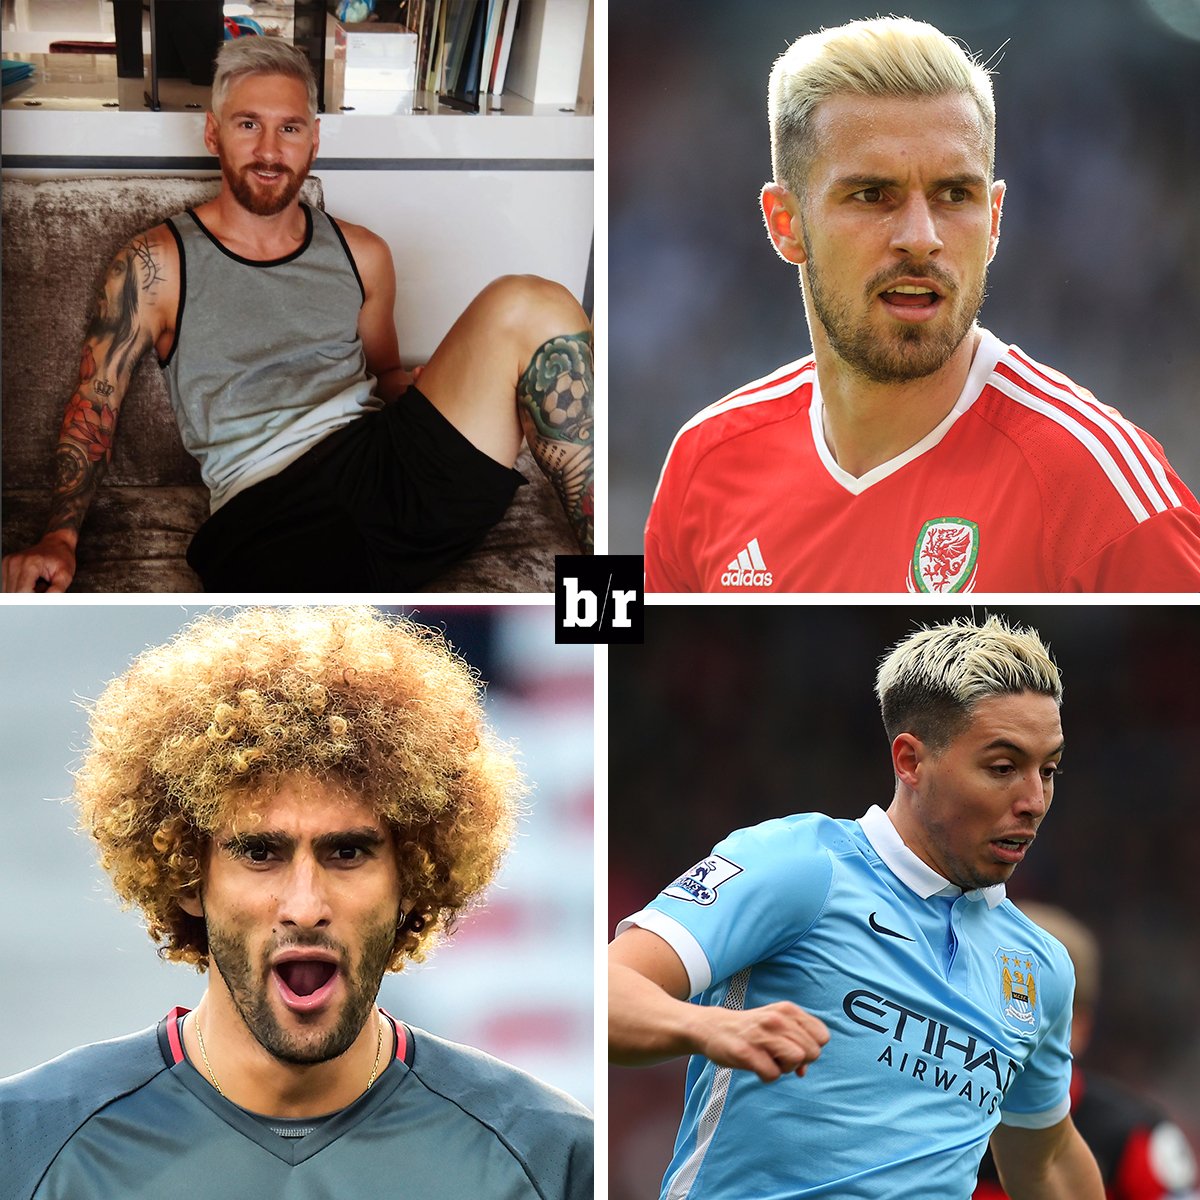 Men With Bleached Hair Ryan Lochte Lionel Messi  Time